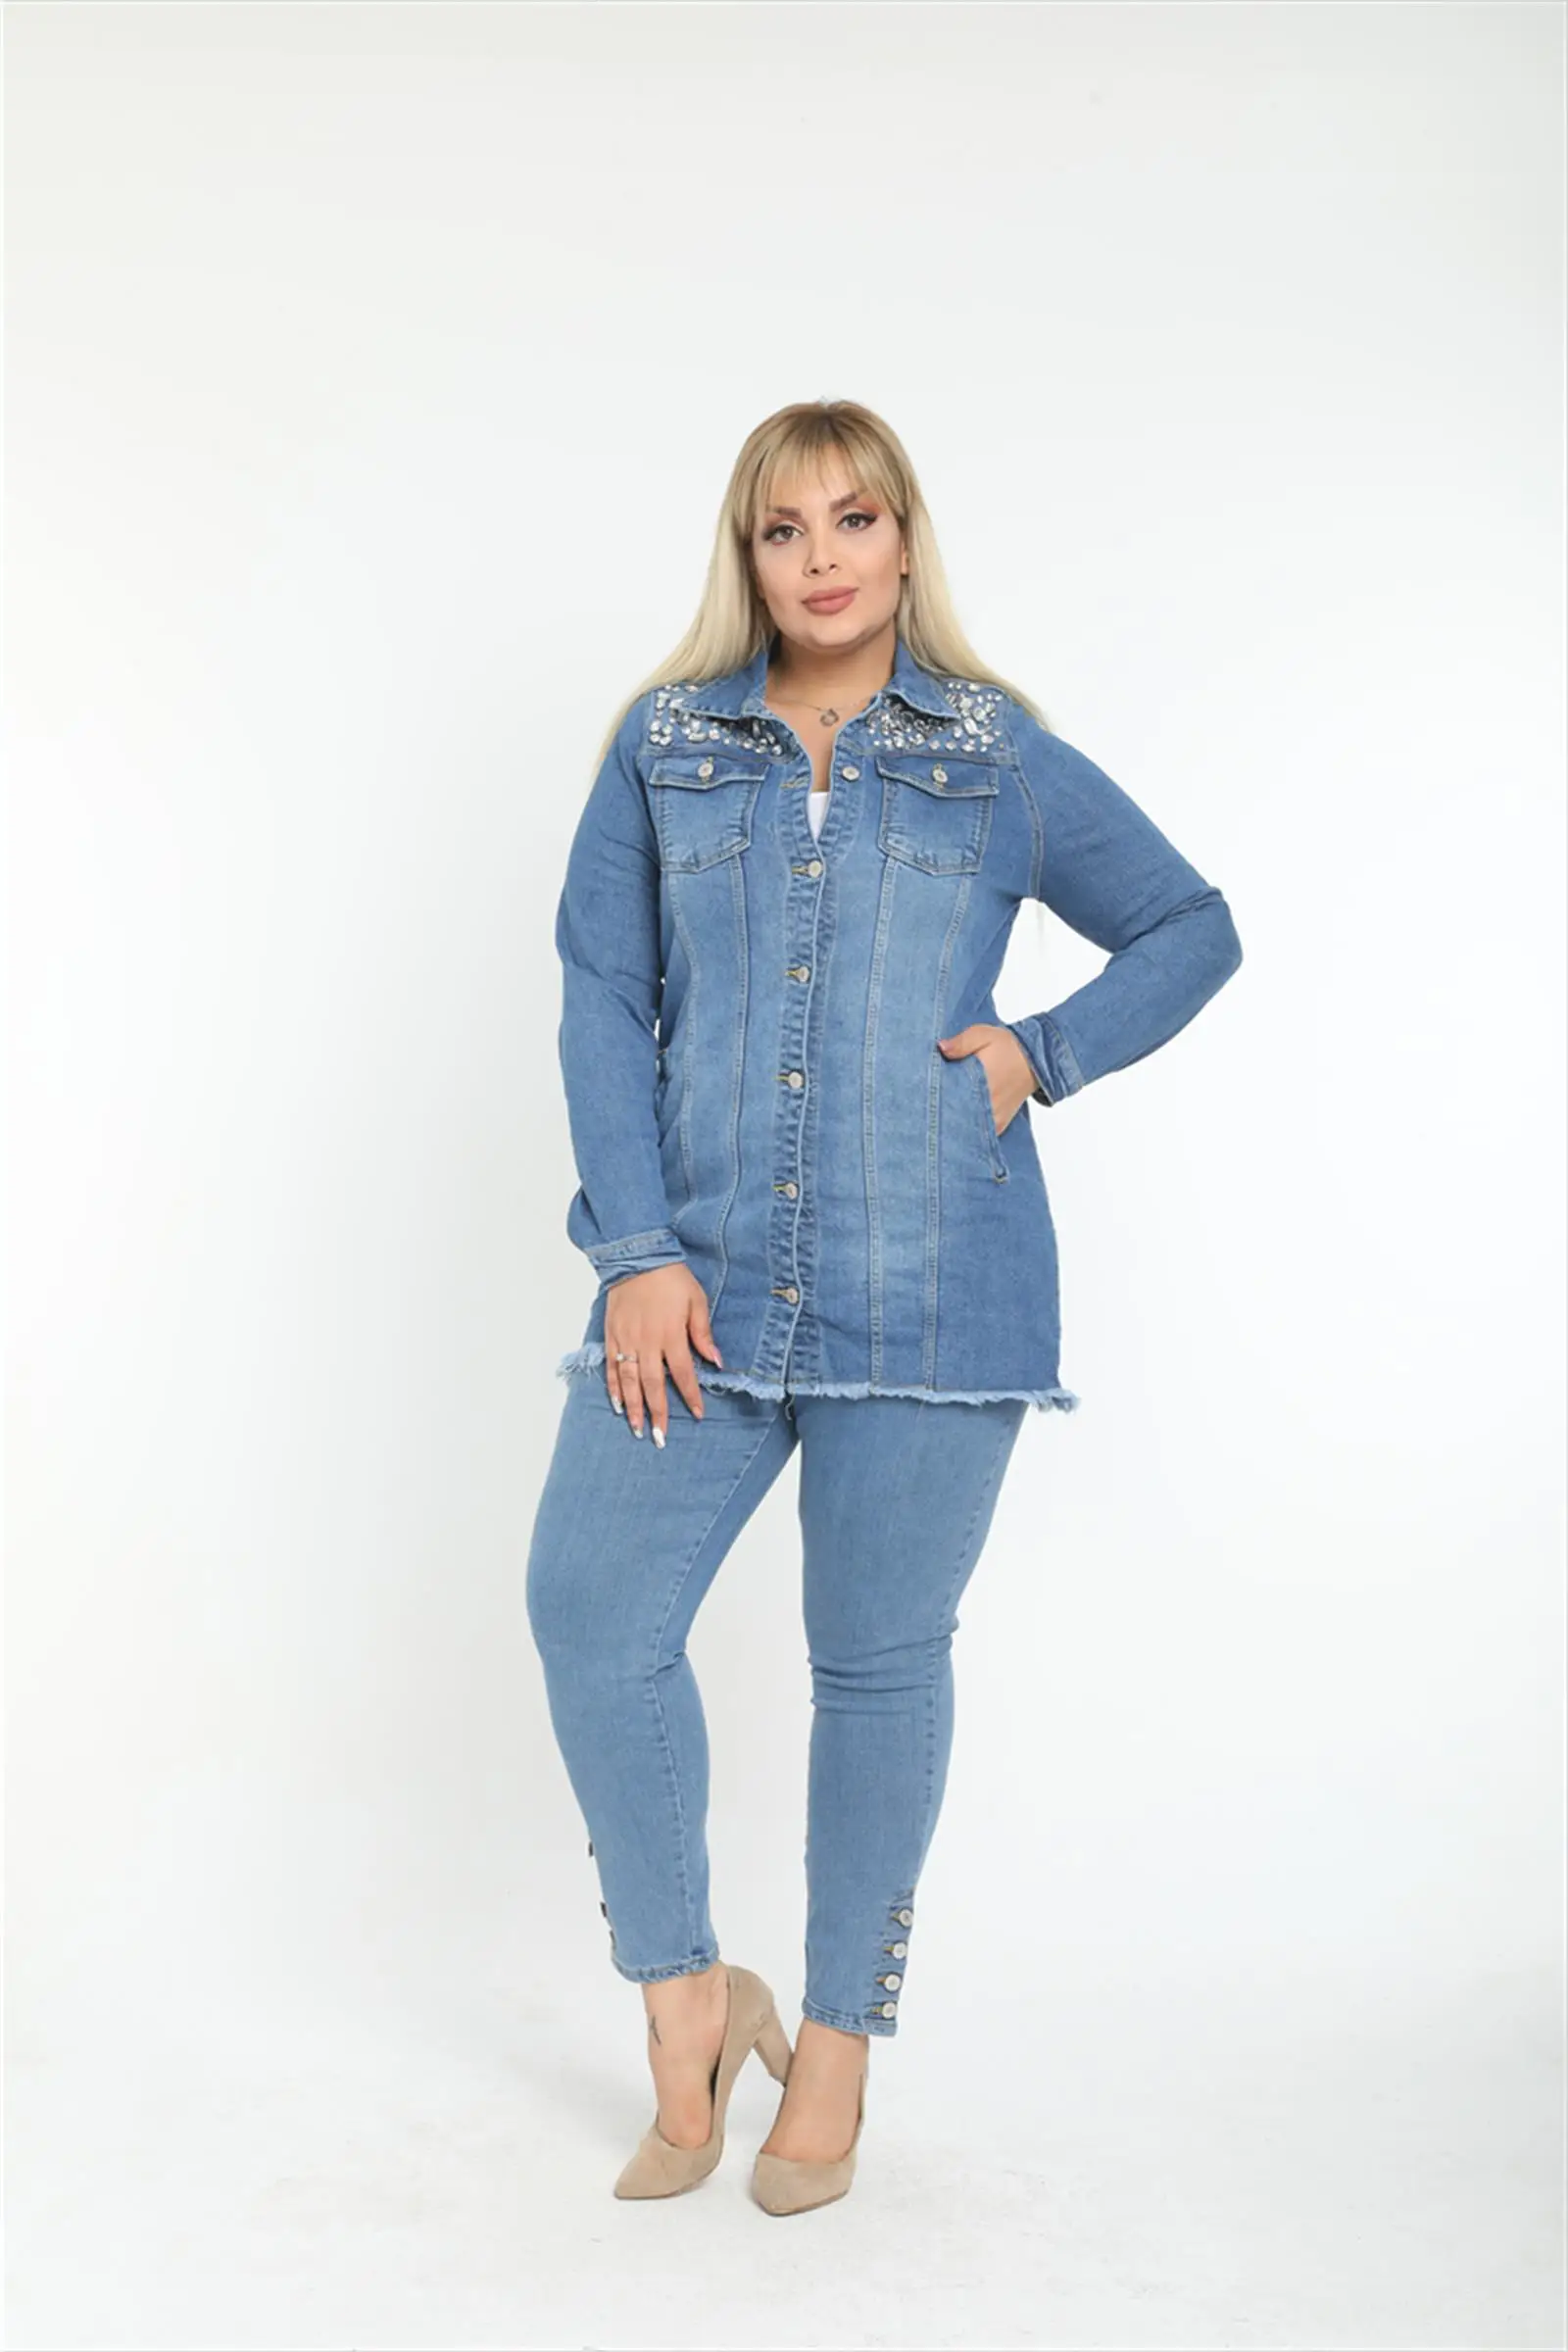 Diaves Women Plus Size Long Sleeve Geometric Stone Embroidered Denim Jacket Fashion Mid-length Pocked and Button Detailed Jeans